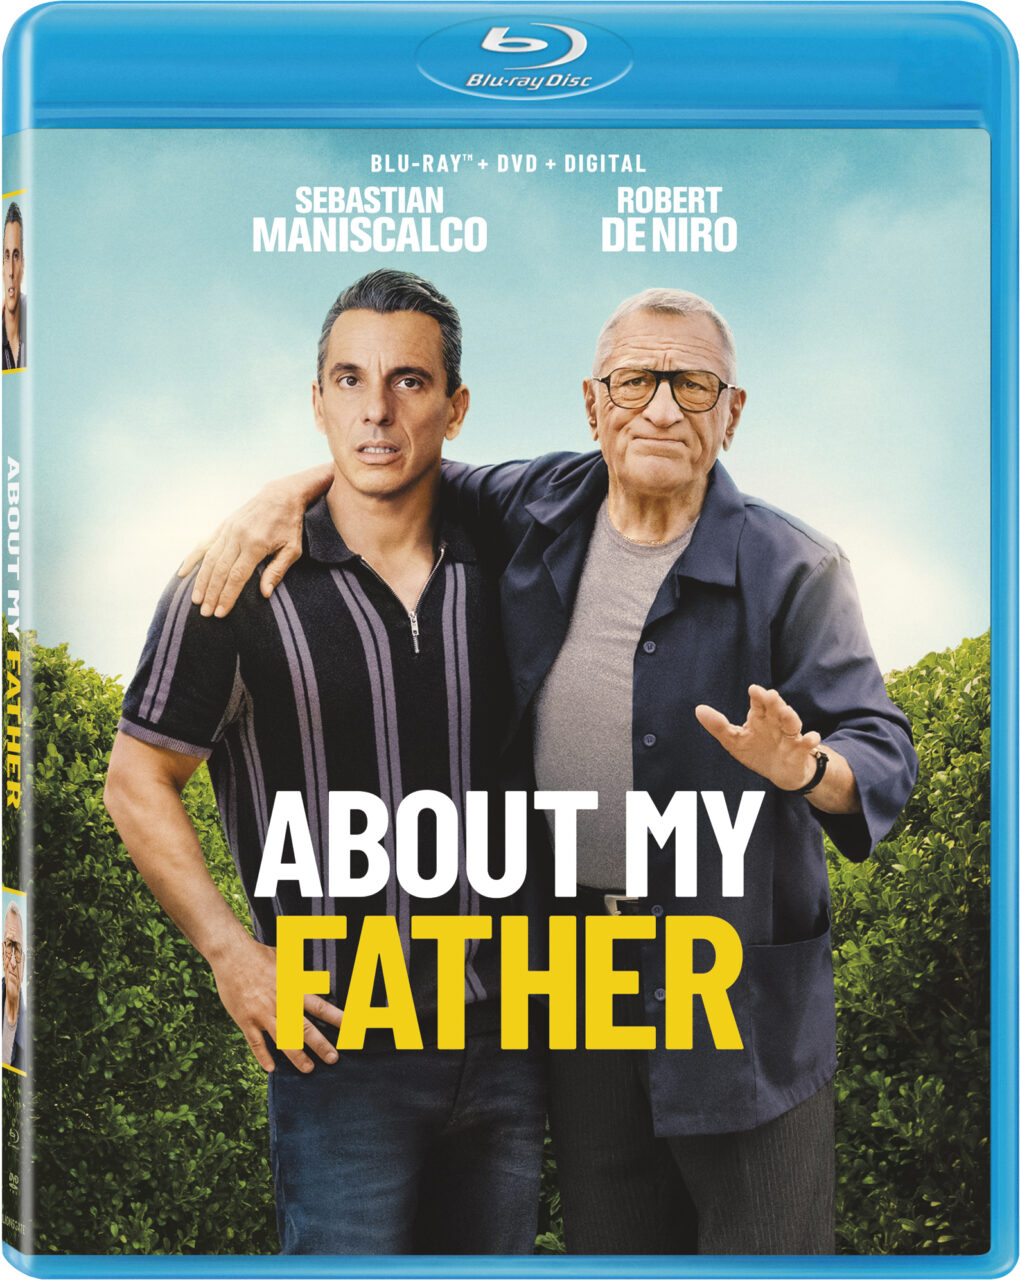 About My Father Blu-Ray Combo Pack cover (Lionsgate)